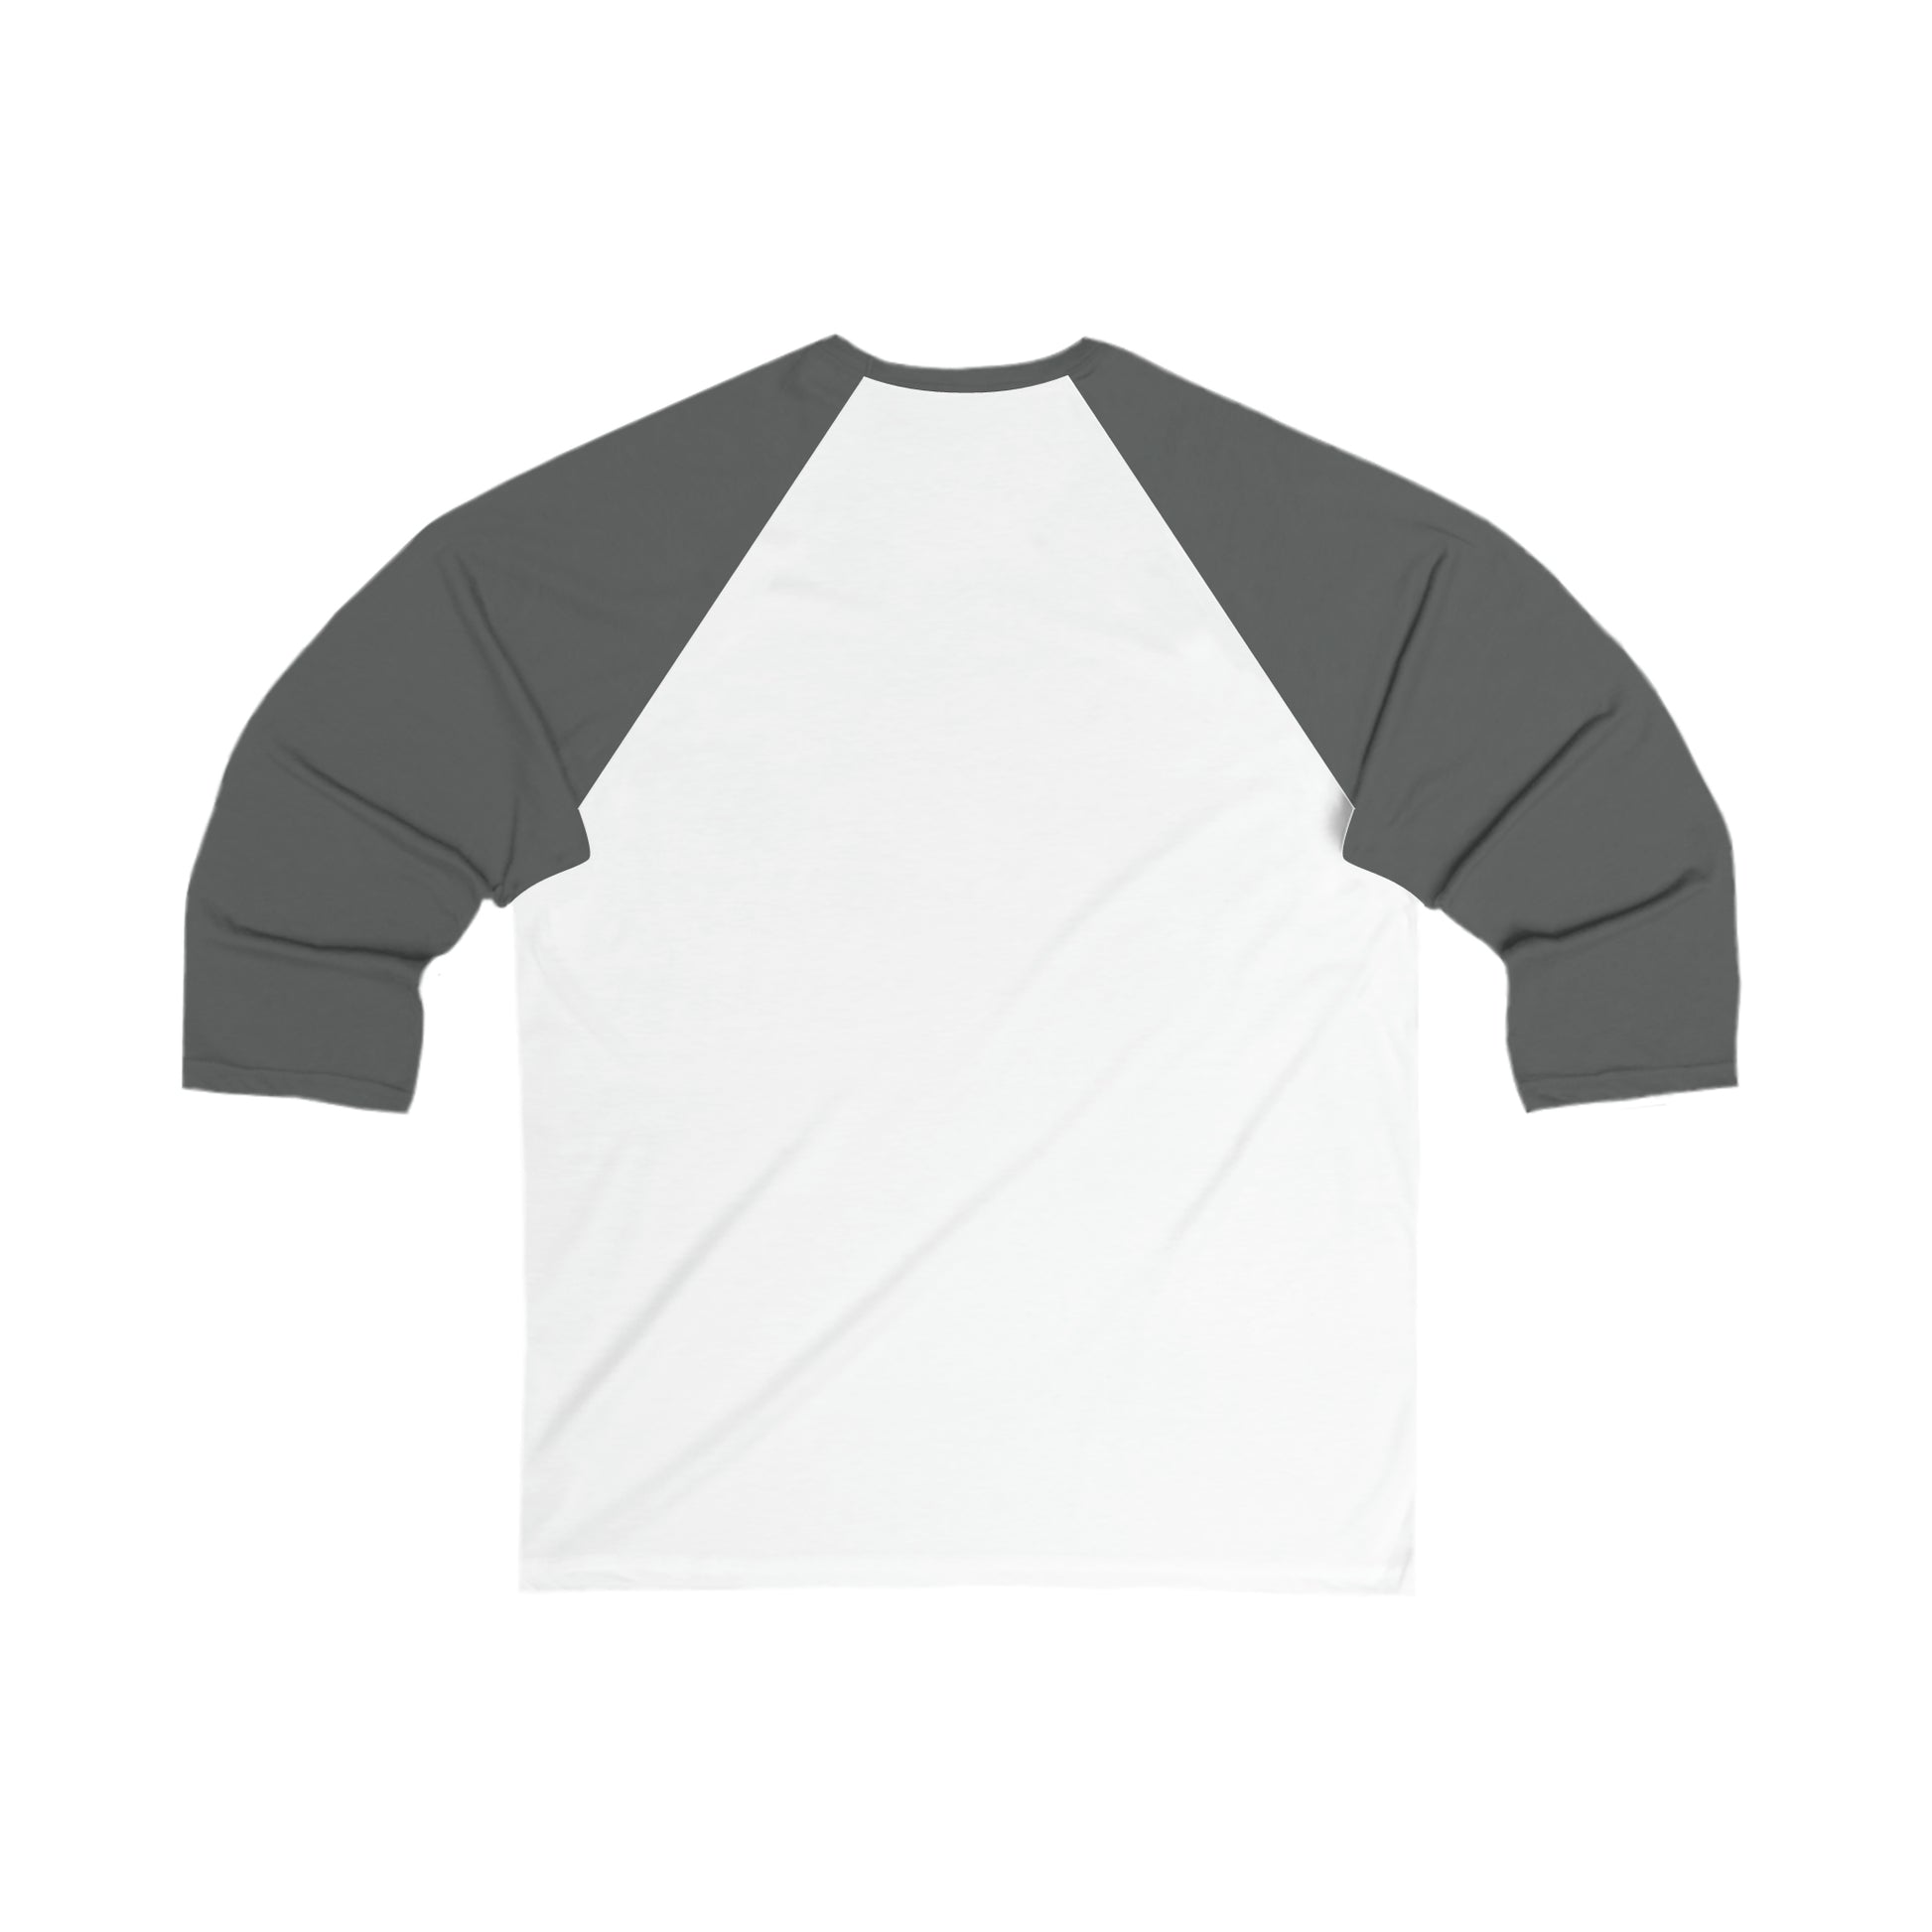 A Unisex 3\4 Sleeve Logo Baseball Tee with white torso and dark gray sleeves, inspired by Toronto's Cabbagetown, displayed on a white background by Printify.